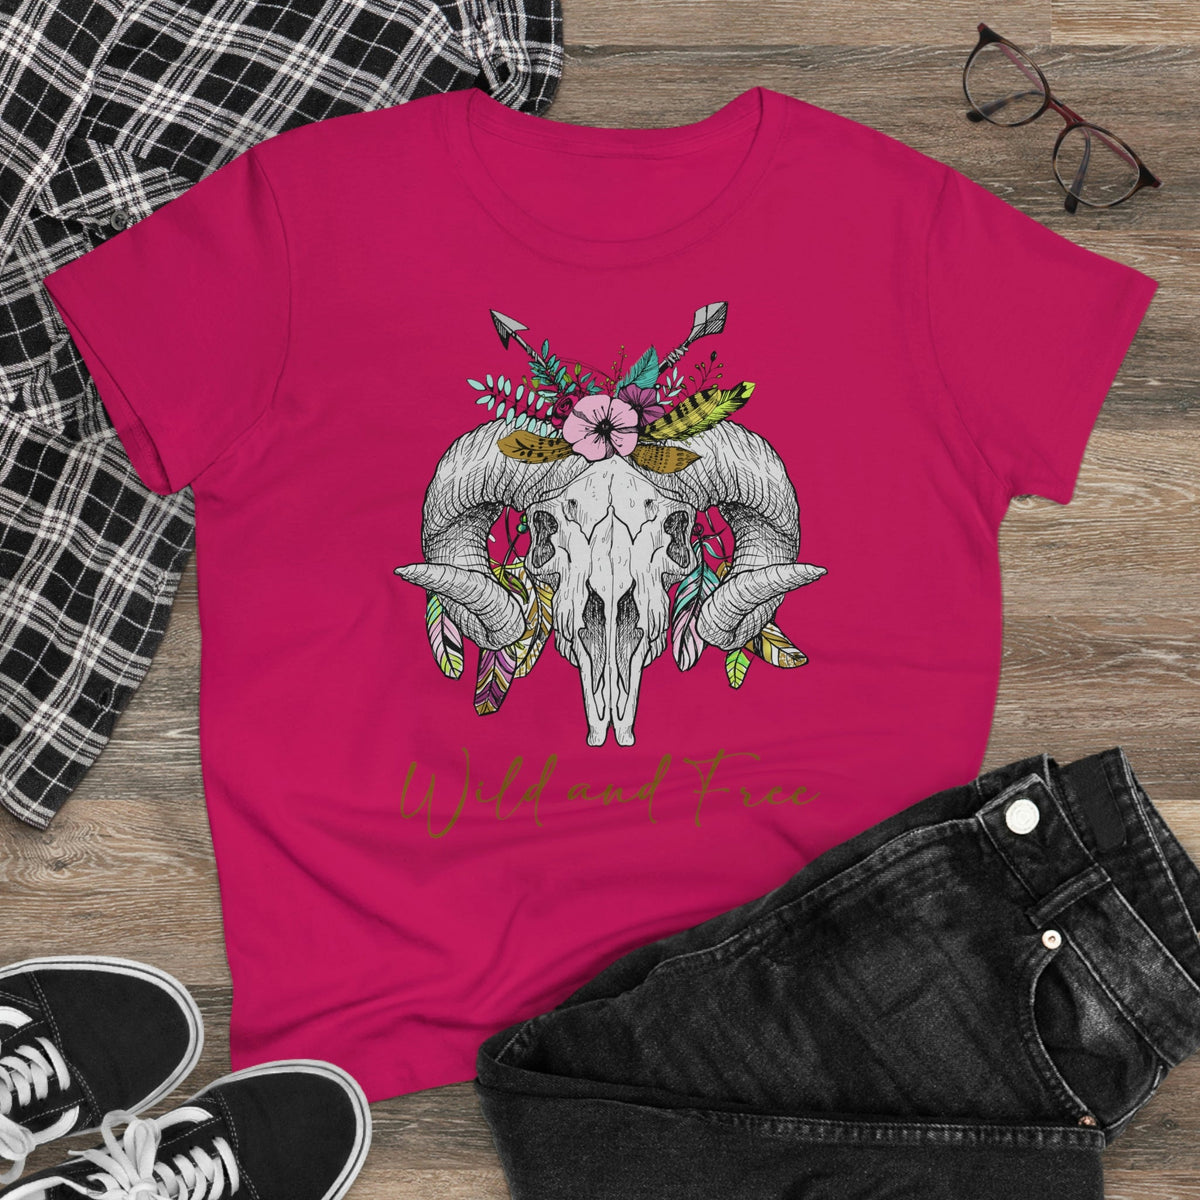 Wild and Free Skull Women's Midweight Cotton Tee - Salty Medic Clothing Co.